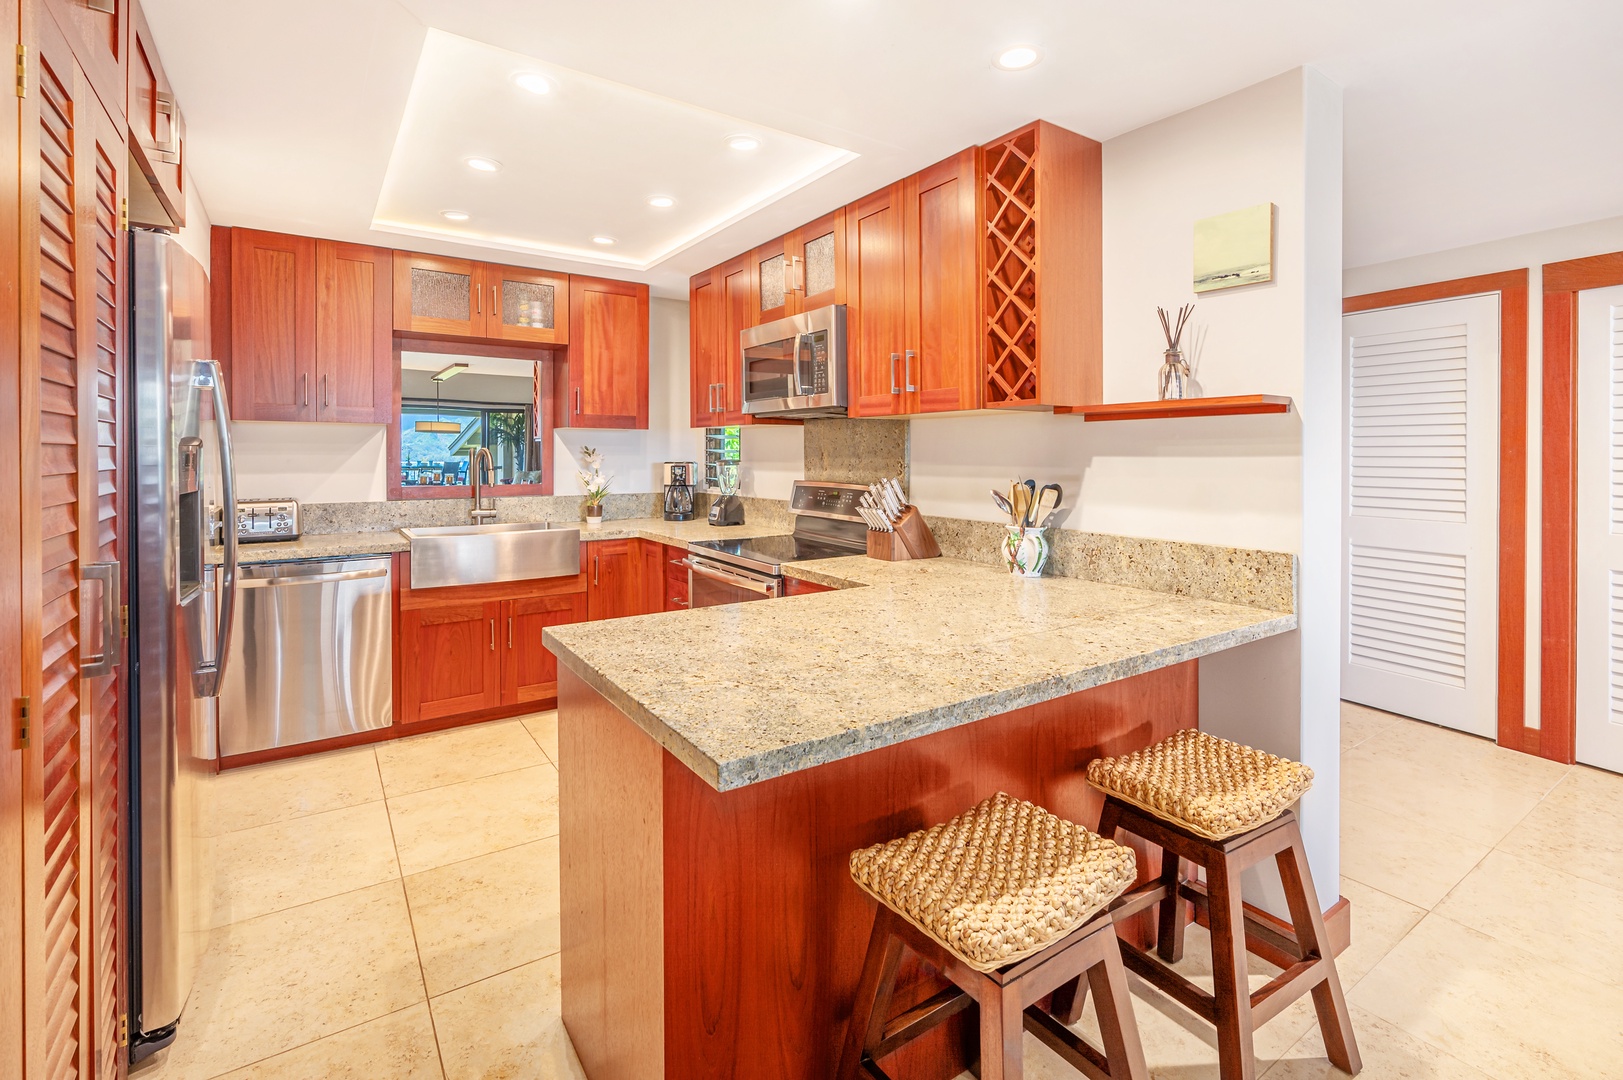 Princeville Vacation Rentals, Hanalei Bay Resort 7307 - You don’t have to take your eyes off the view as you prepare meals in the full-size kitchen, where a charming breakfast bar and adjacent indoor dining table for six serve as an ideal place to gather and eat